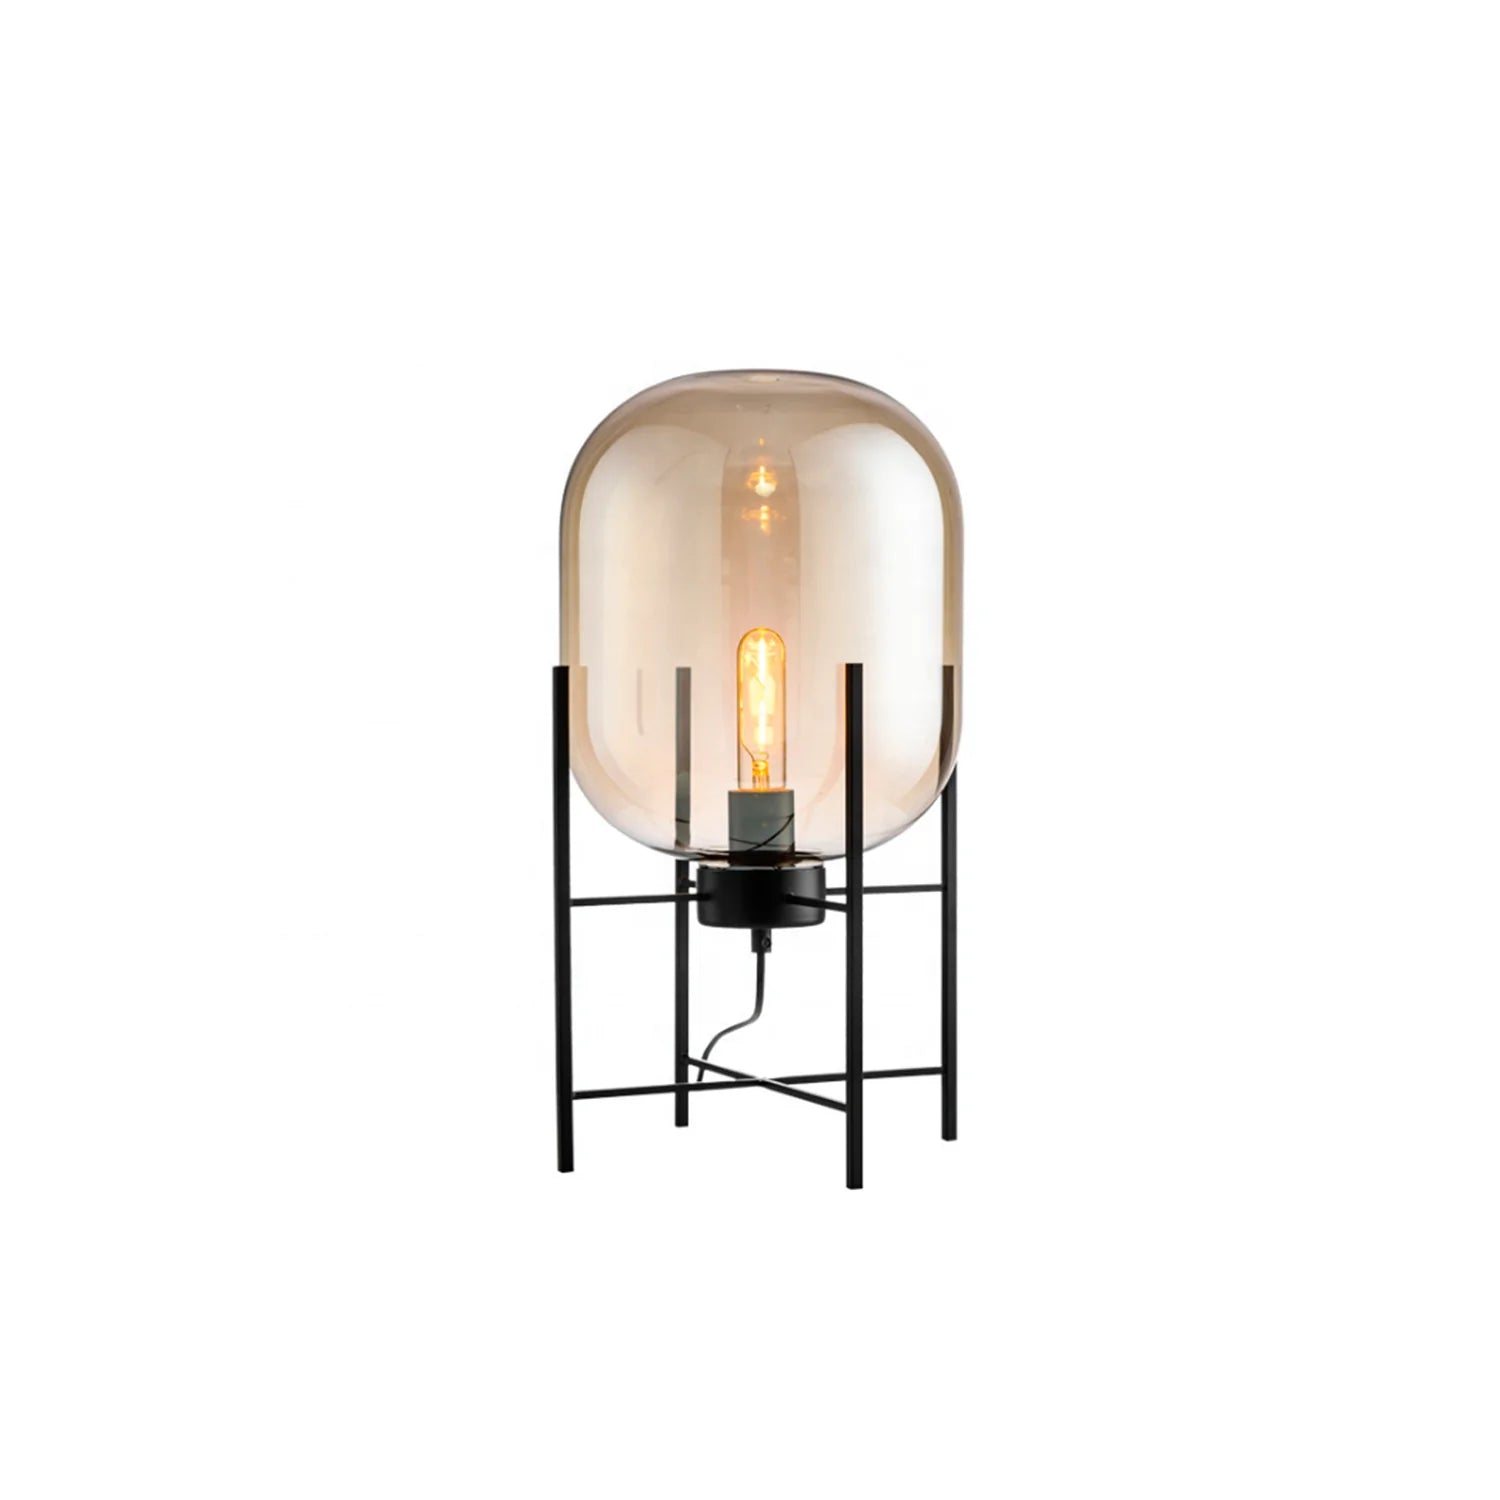 NORDIC GLASS FLOOR LAMP: A PERFECT WAY TO ENHANCE THE BEAUTY OF YOUR HOME